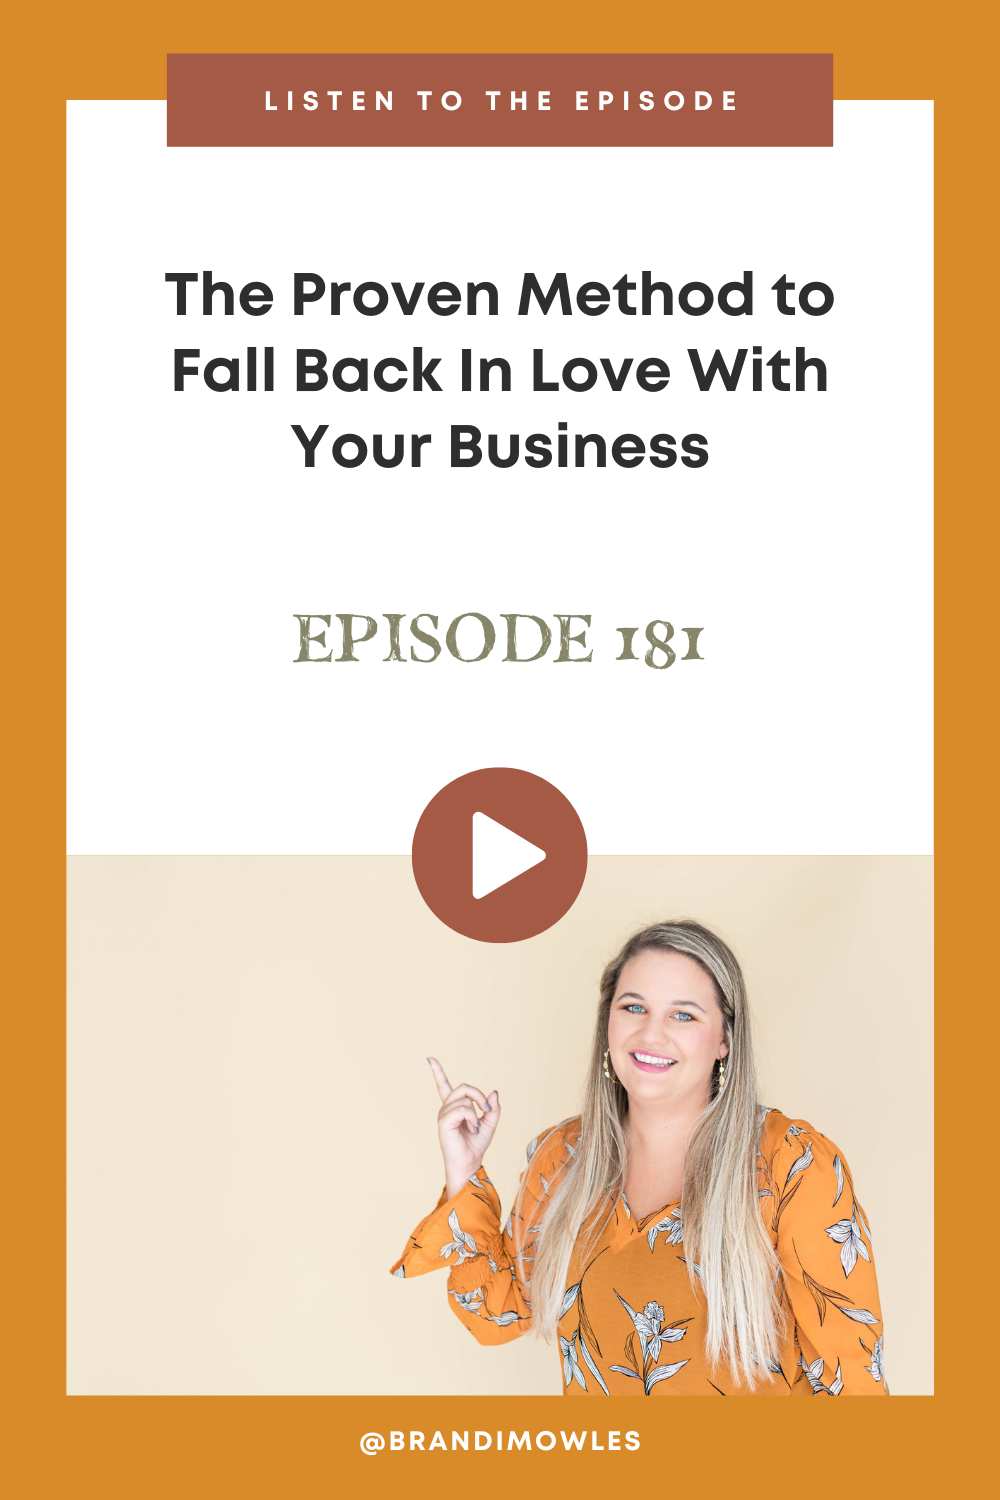 Brandi Mowles podcast episode feature about falling in love with your business